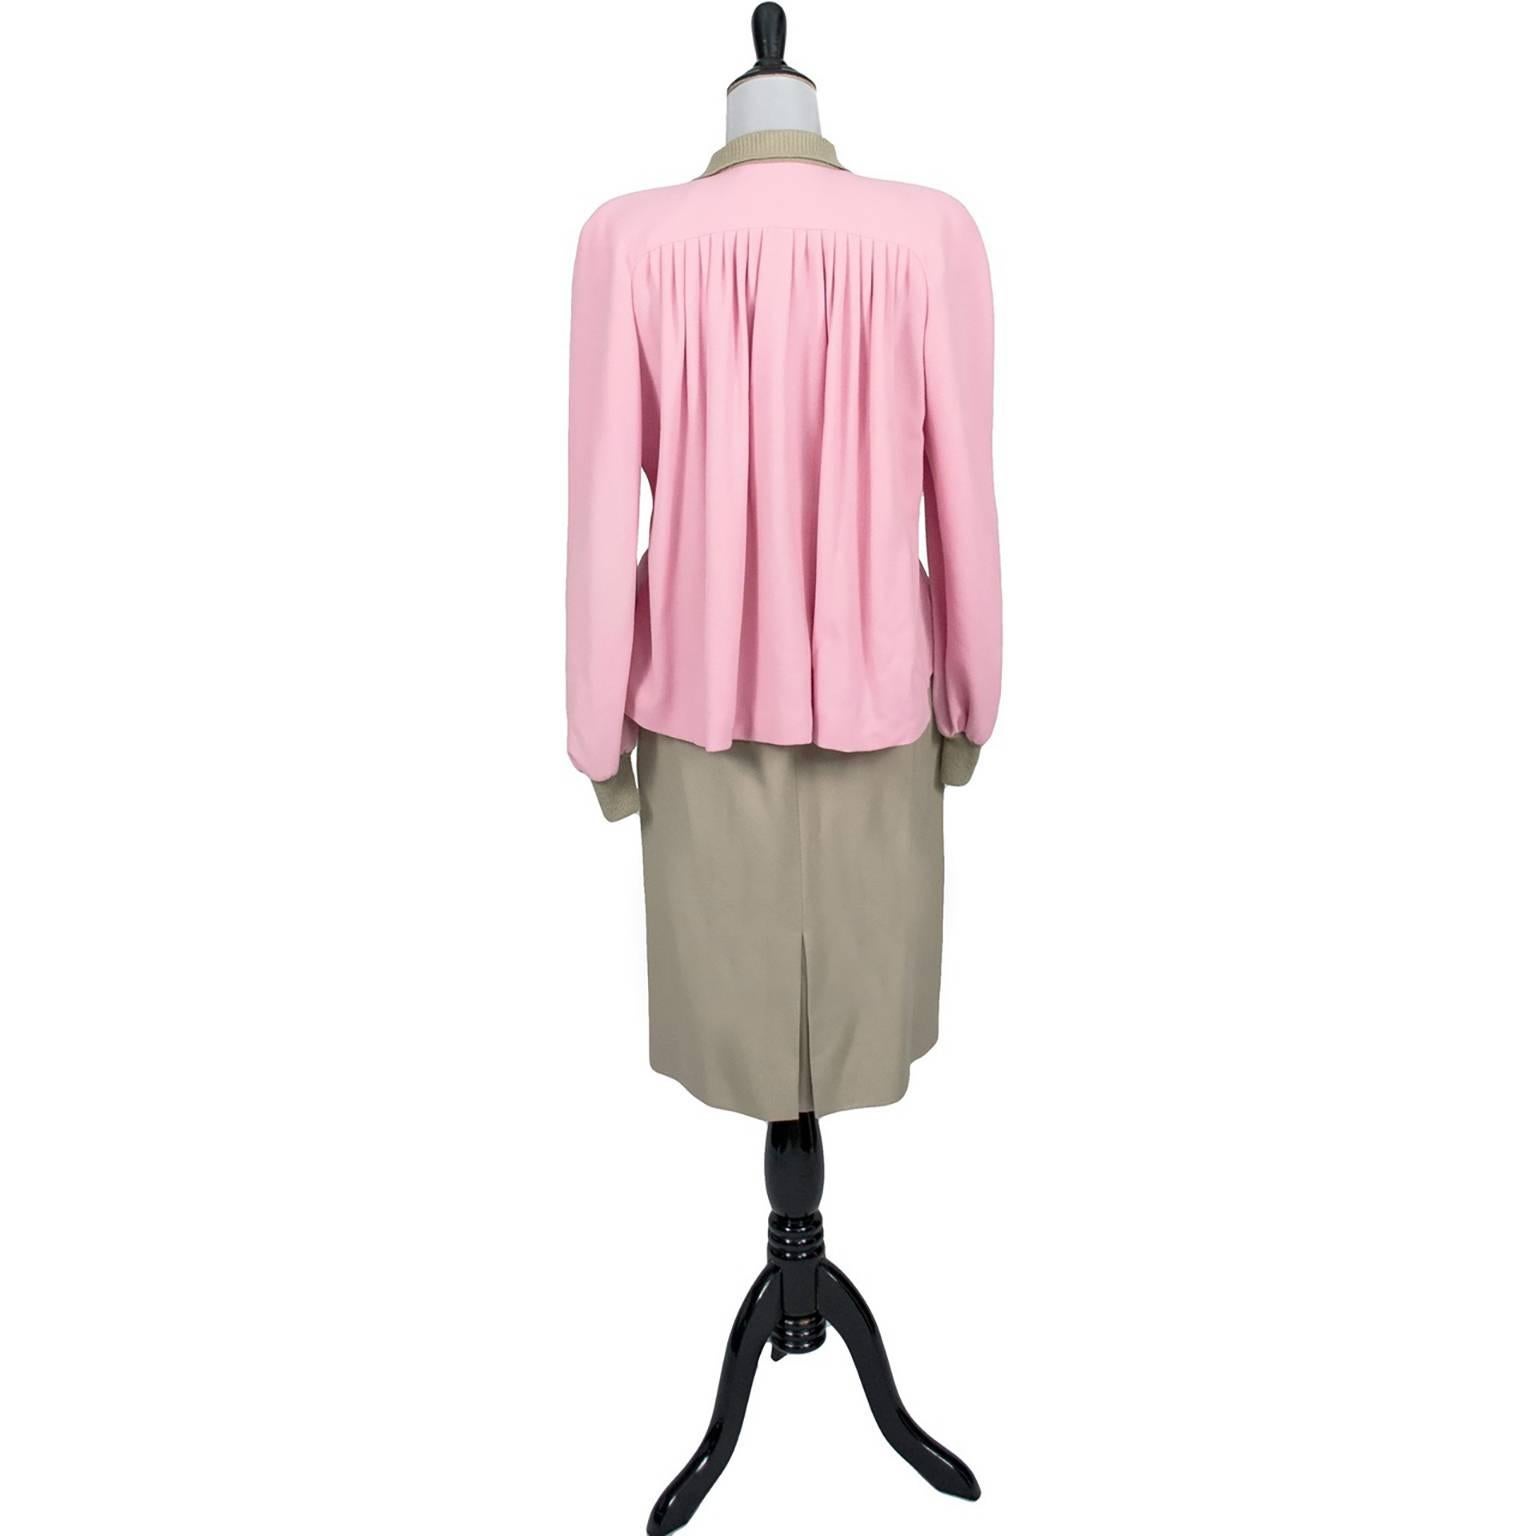 1984 Runway Vintage Valentino Boutique 2pc Skirt Top Outfit Pink & Camel Size 8 3